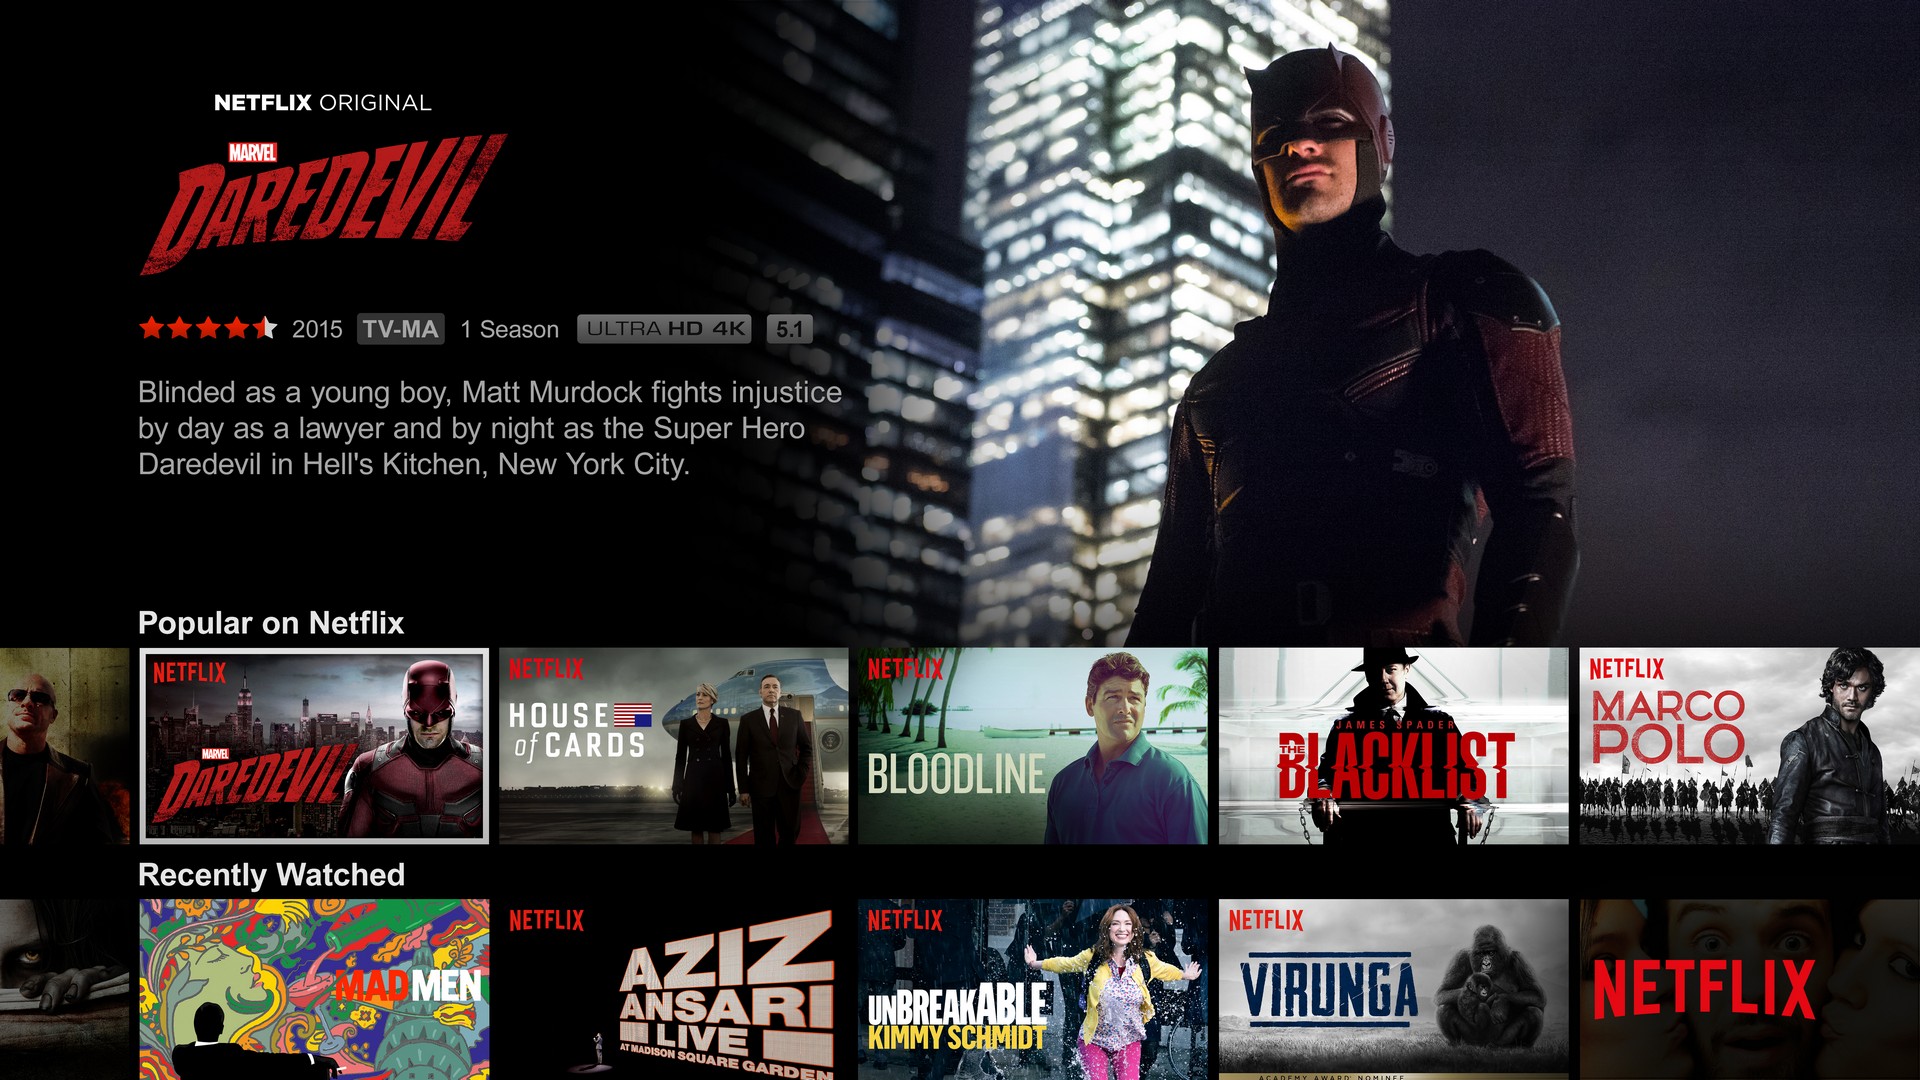 Here’s an easy way to browse any genre you want on Netflix Phandroid